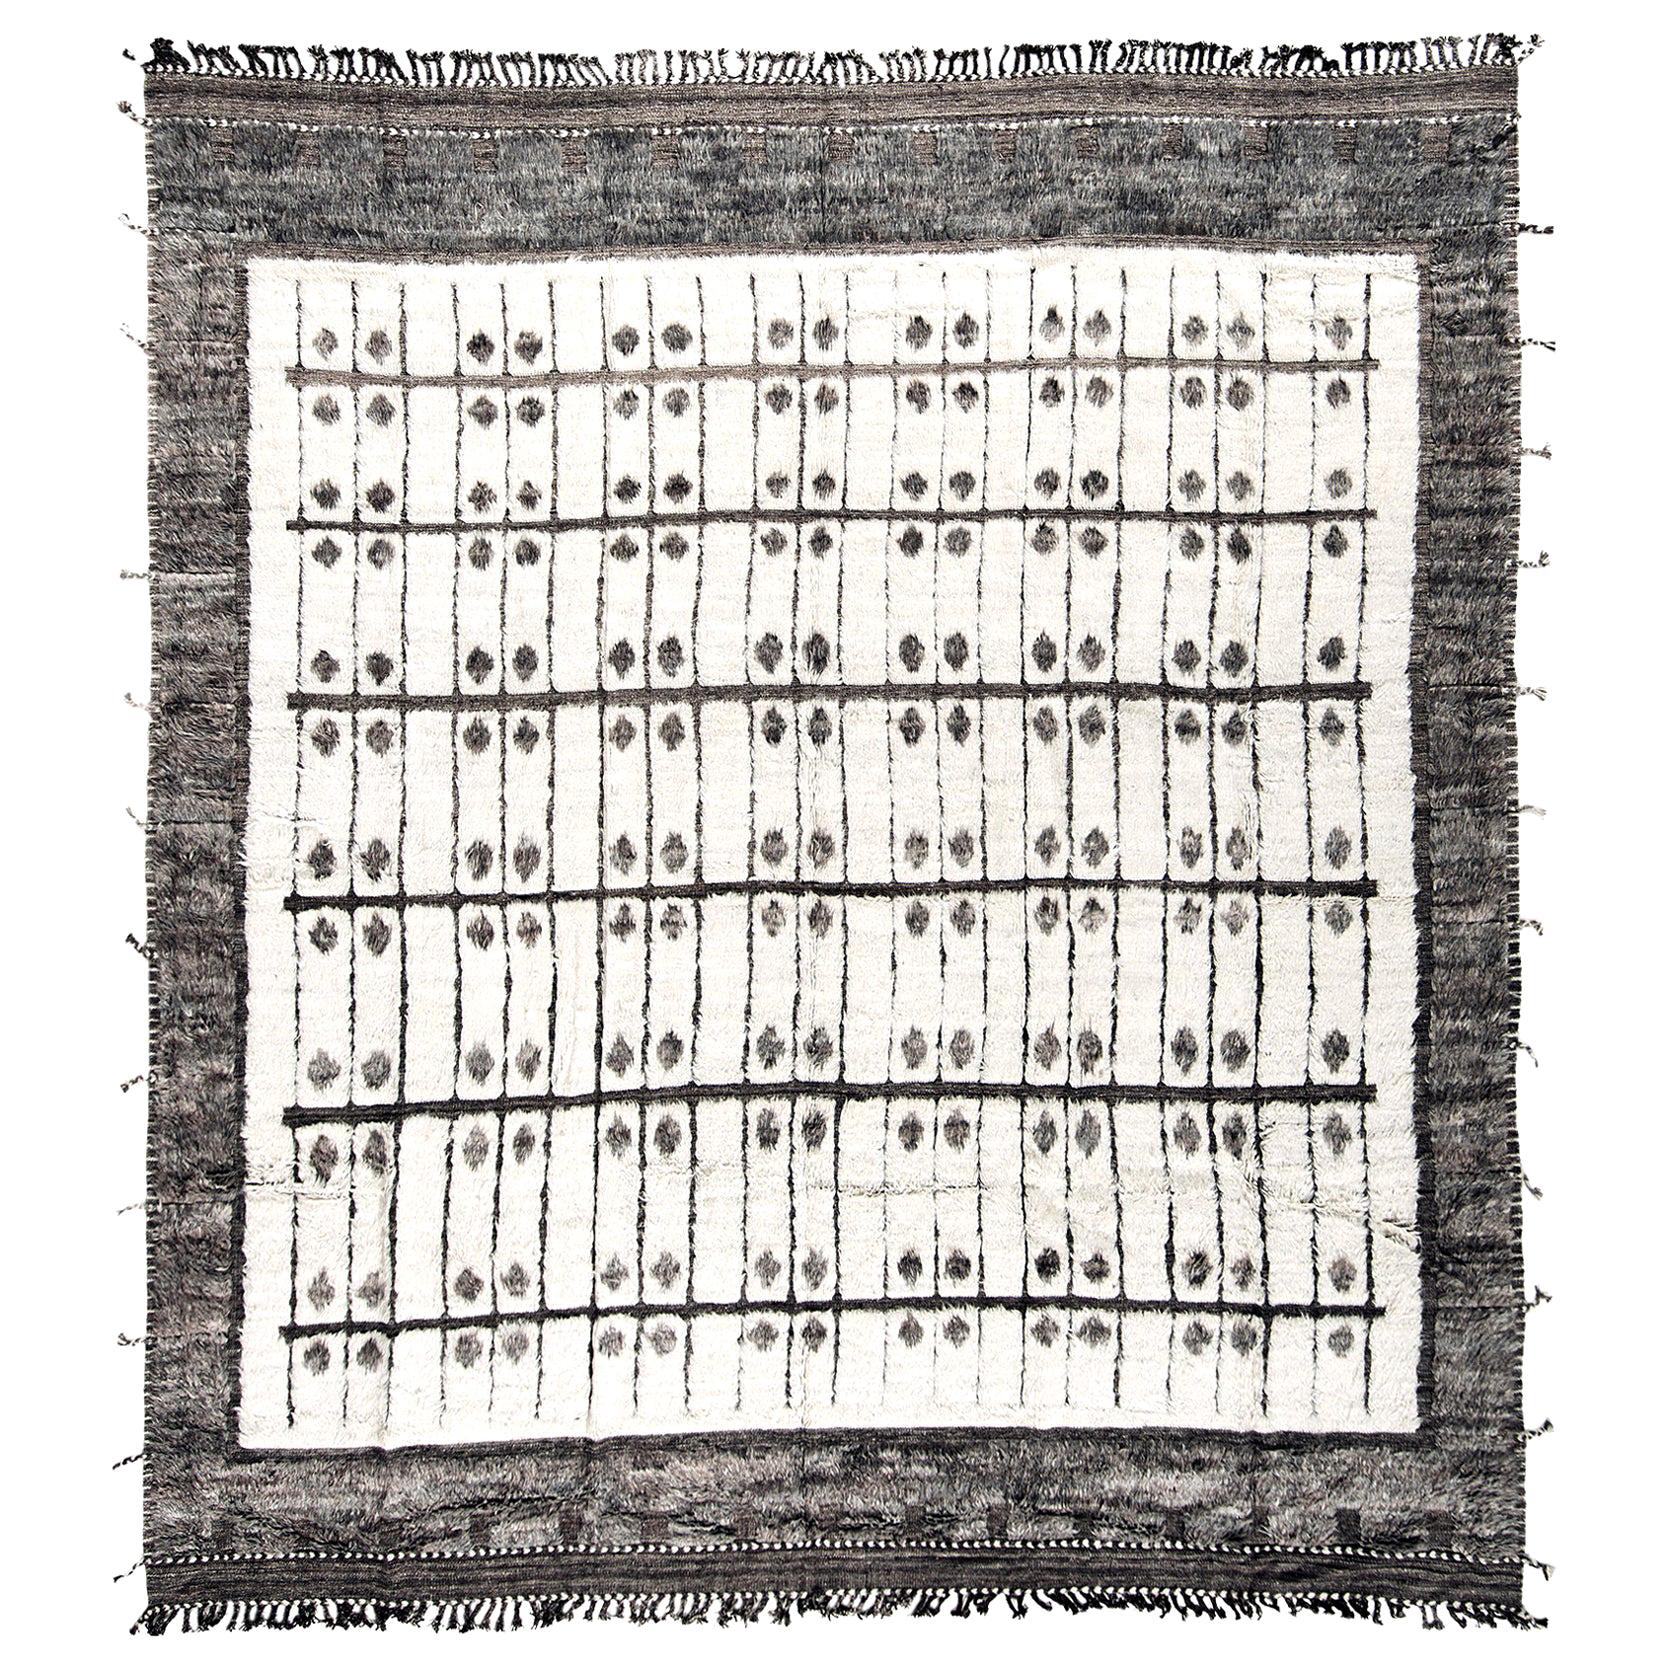 Modern & Trendy Boho Chic Rug from Central Asia. Size: 11 ft 5 in x 12 ft 7 in 